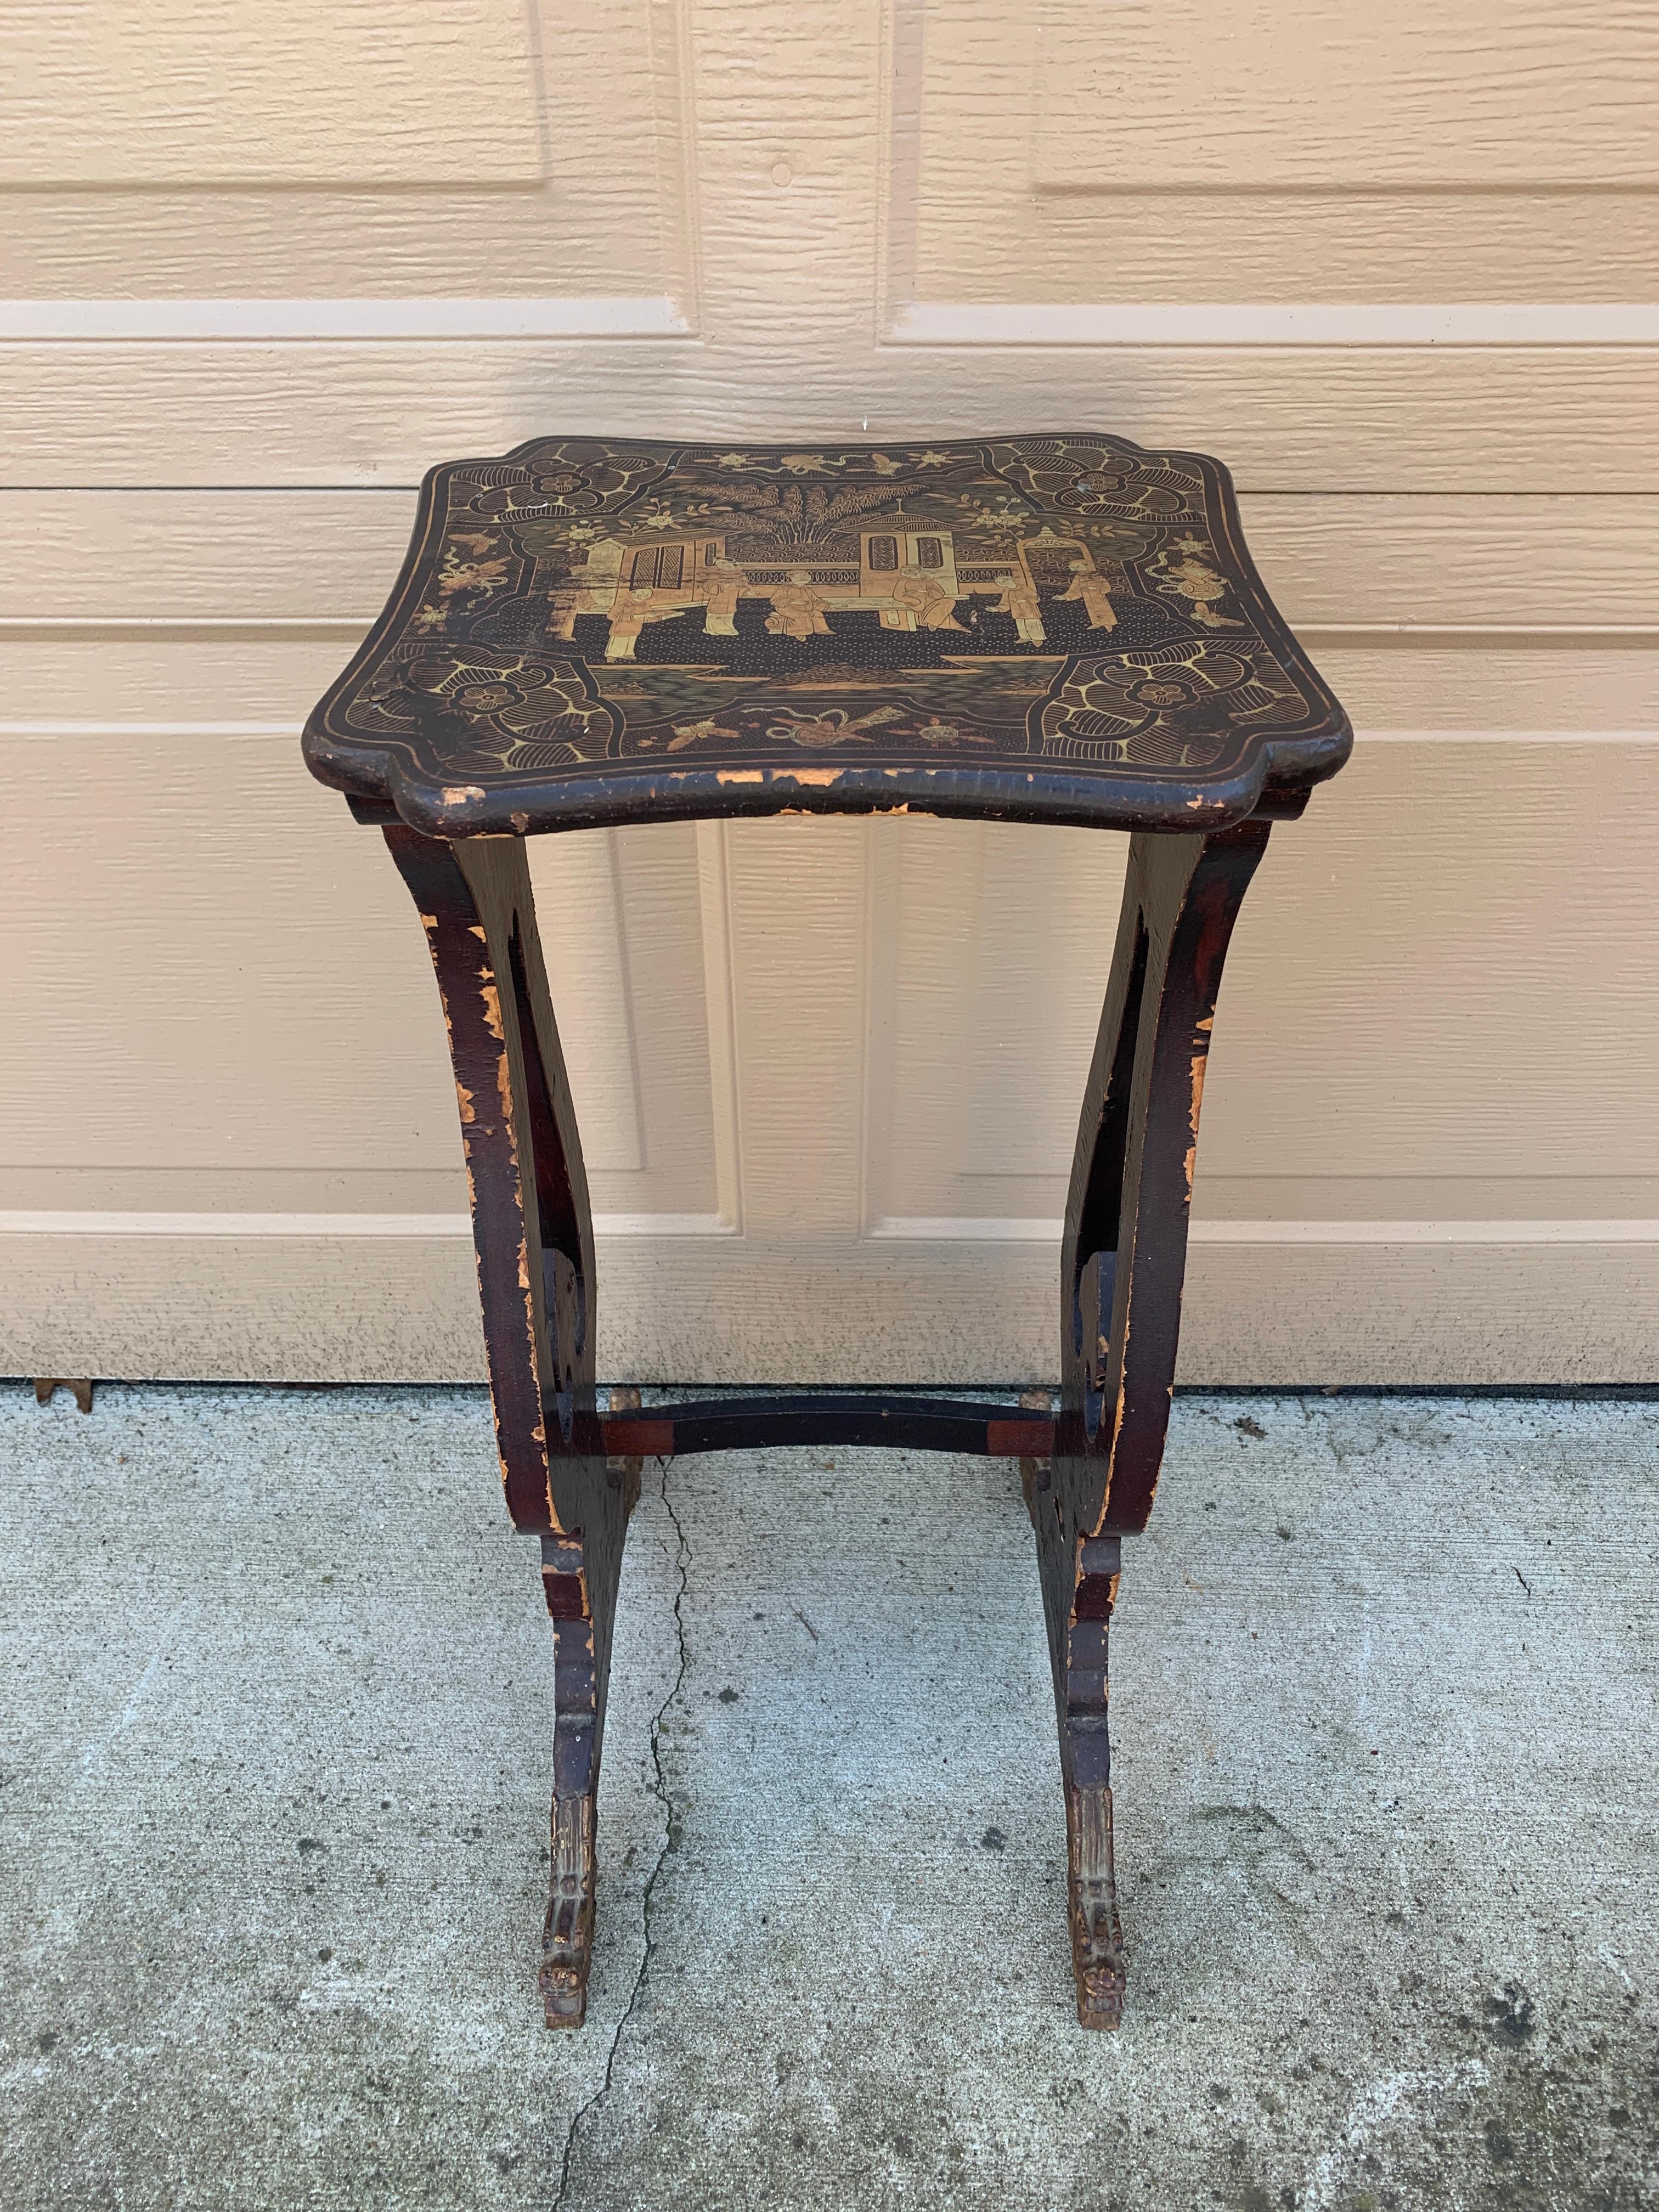 Antique Regency Chinoiserie Black Lacquered Nesting Tables with Carved Dragons For Sale 5